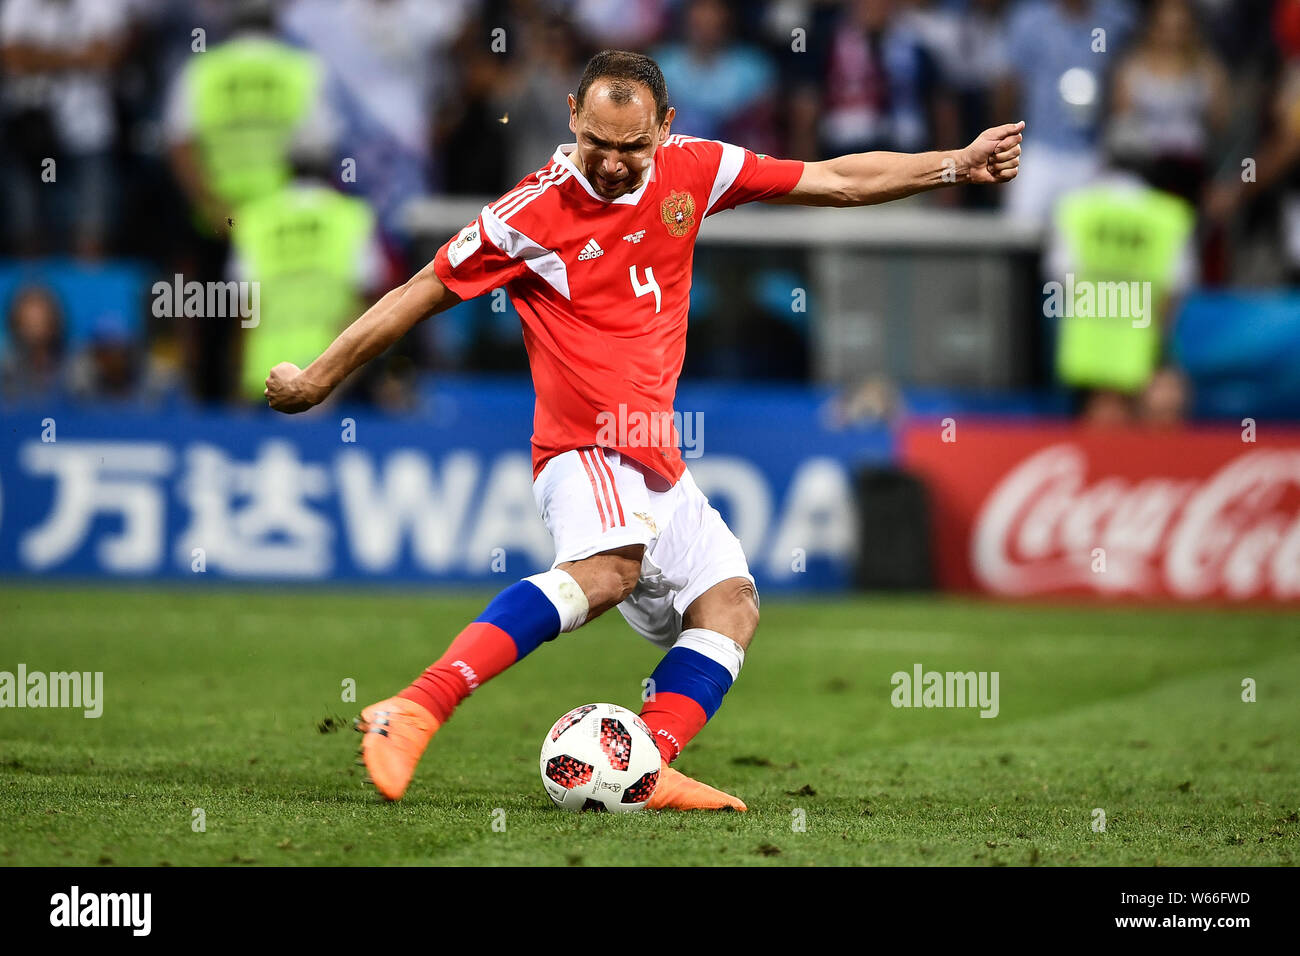 Sergei Ignashevich of Russia plays a penalty kick against Croatia in their quarterfinal match during the 2018 FIFA World Cup in Sochi, Russia, 7 July Stock Photo